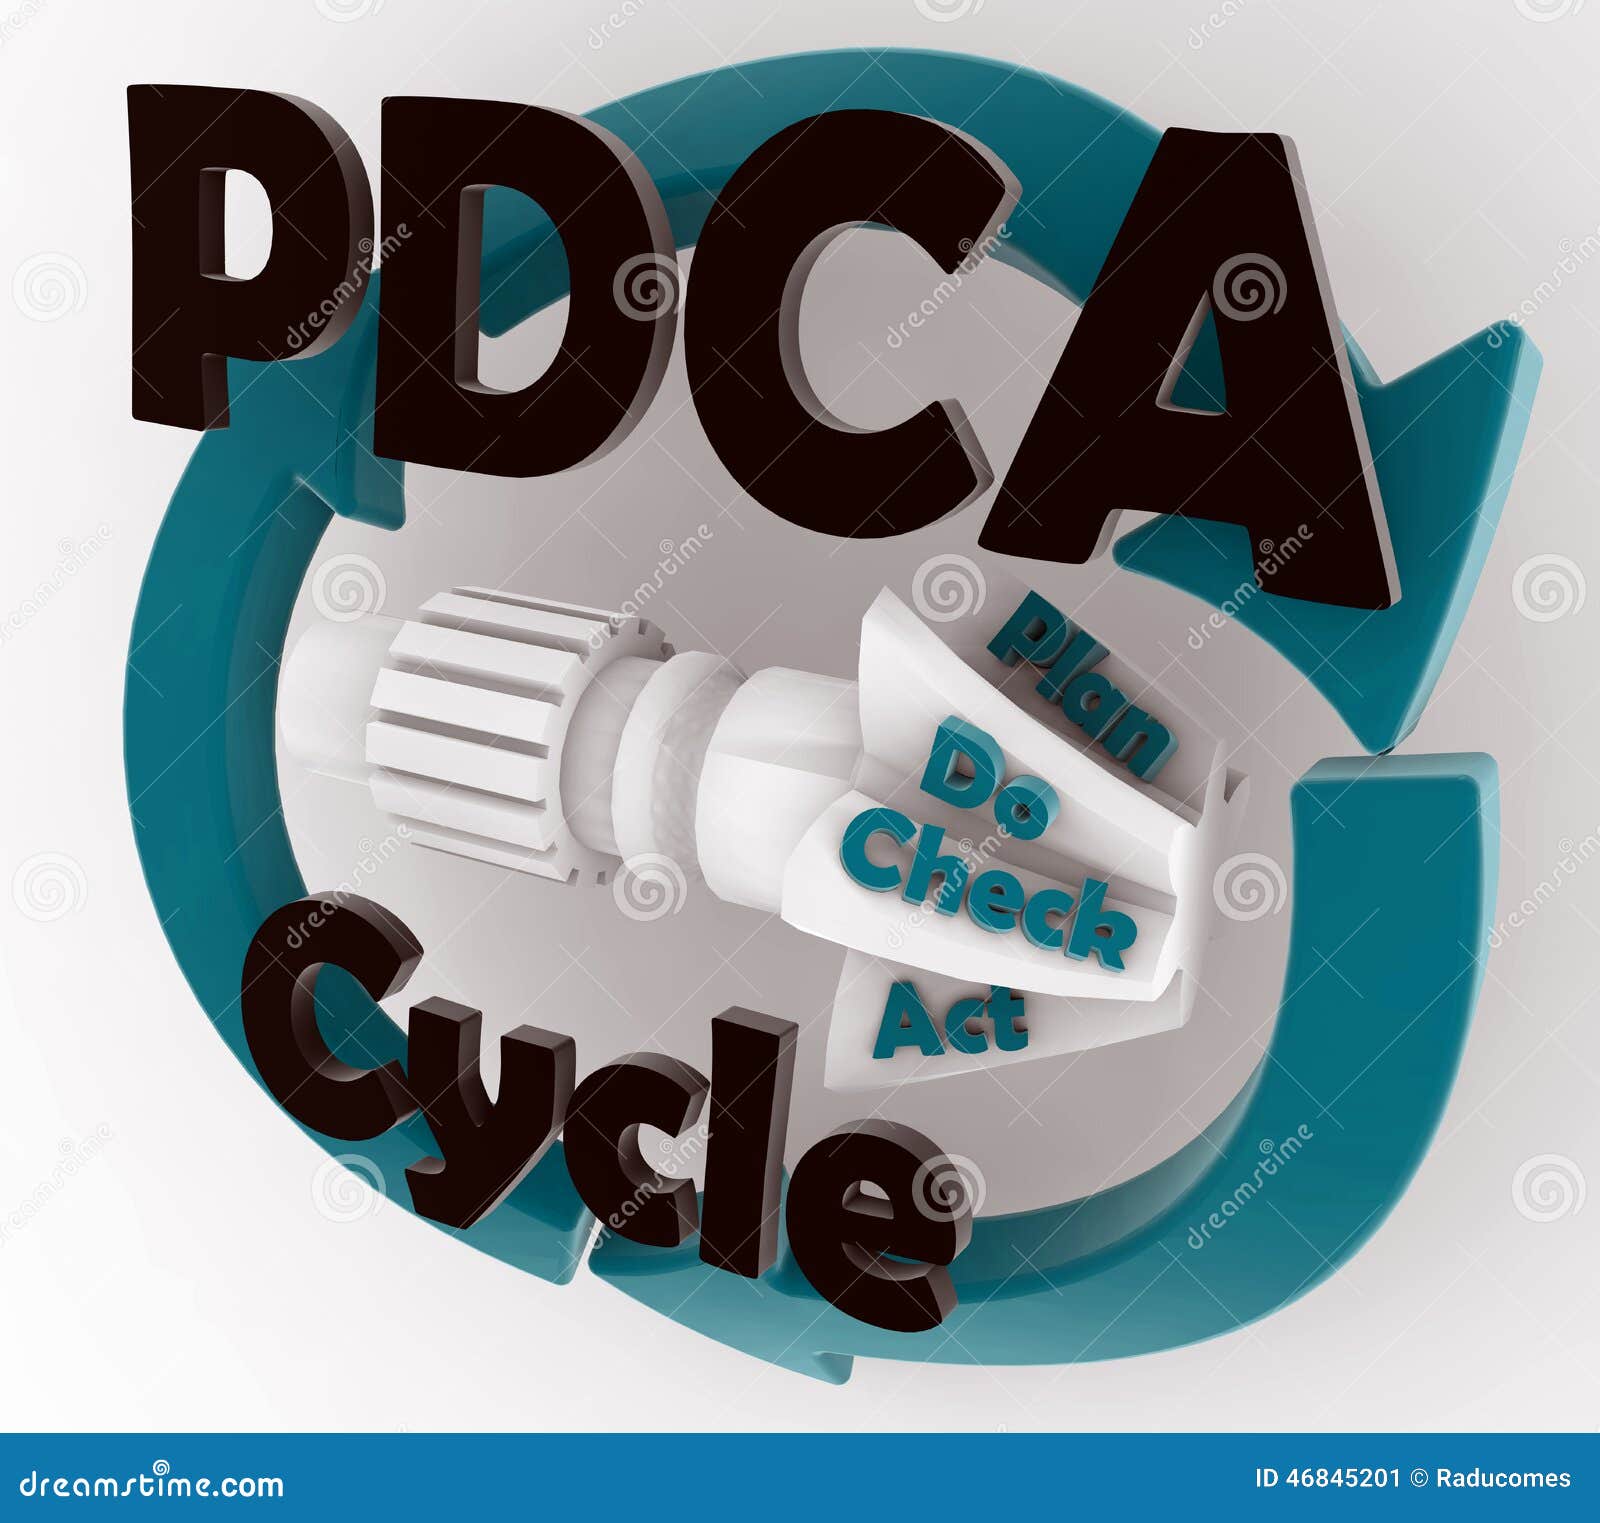 pdca - plan, do, check, act cycle teal render